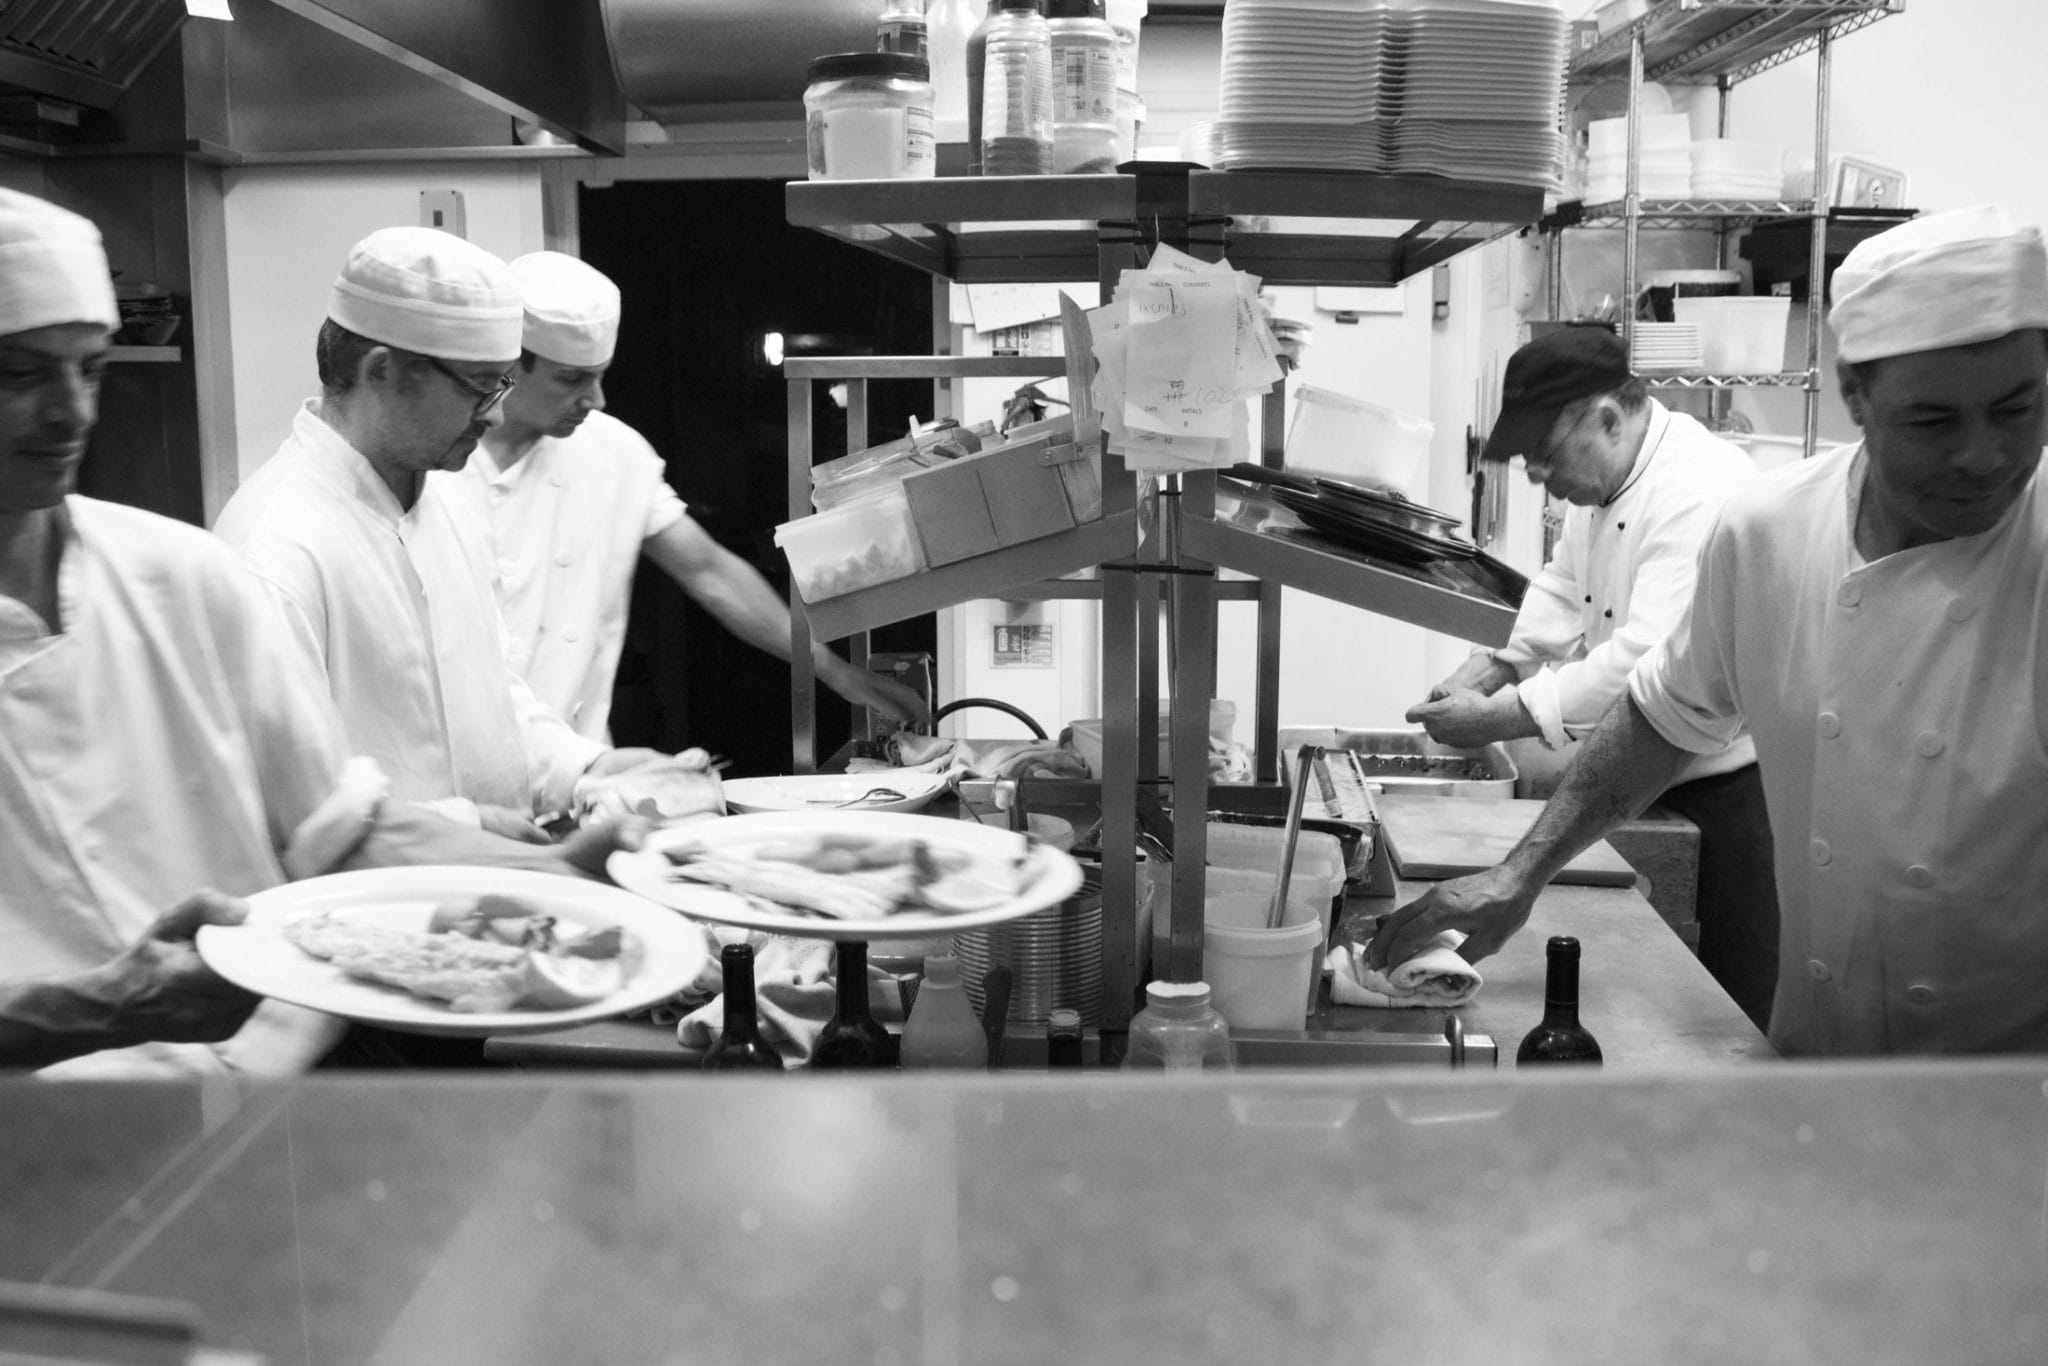 black and white image of chefs working on food preperations in the kitchen